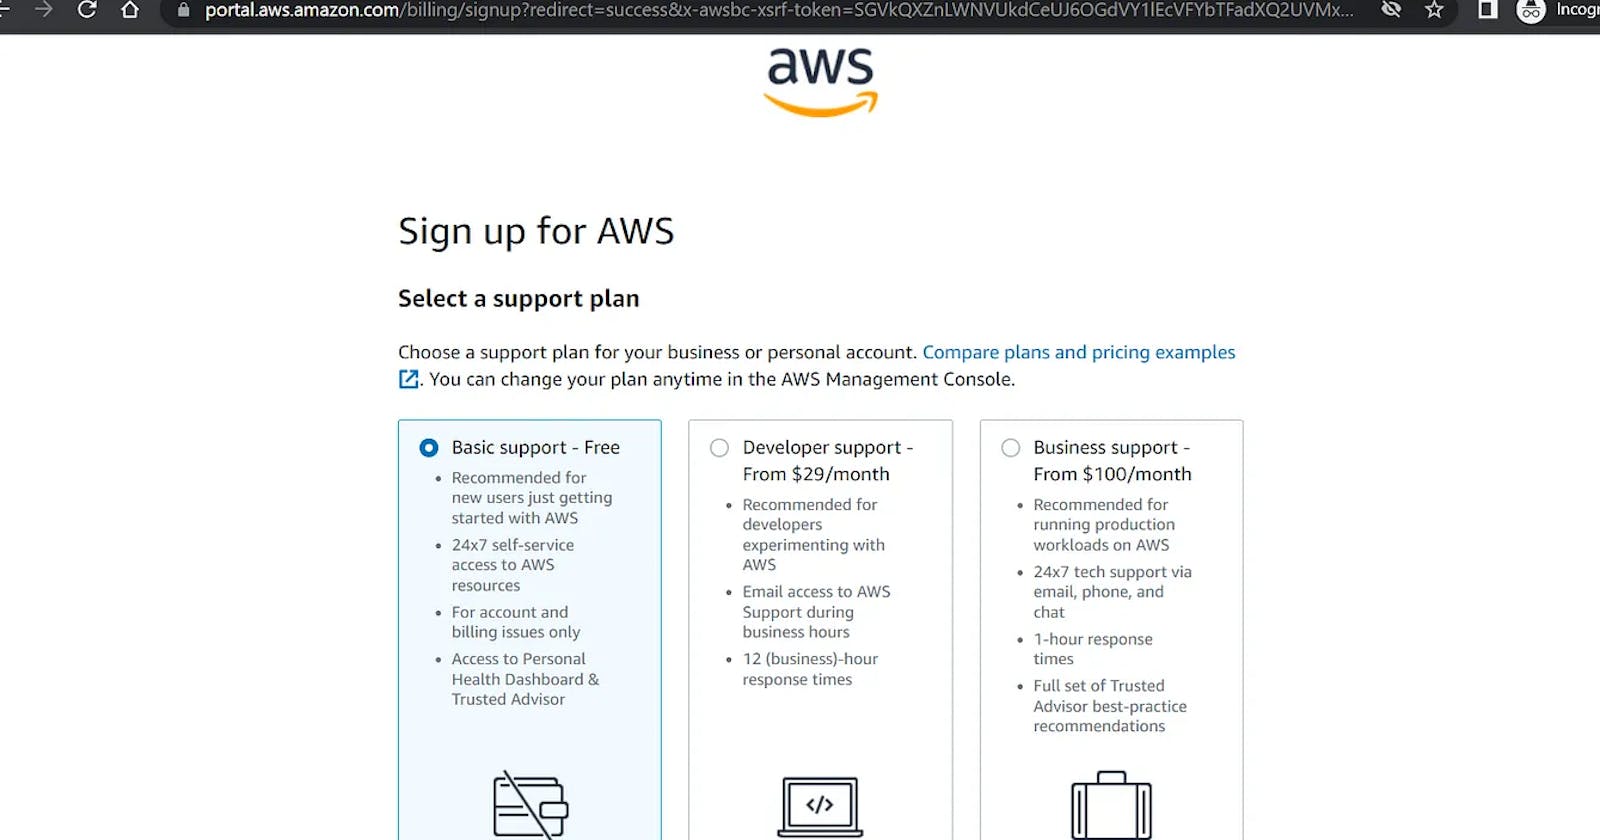 AWS Support Plan